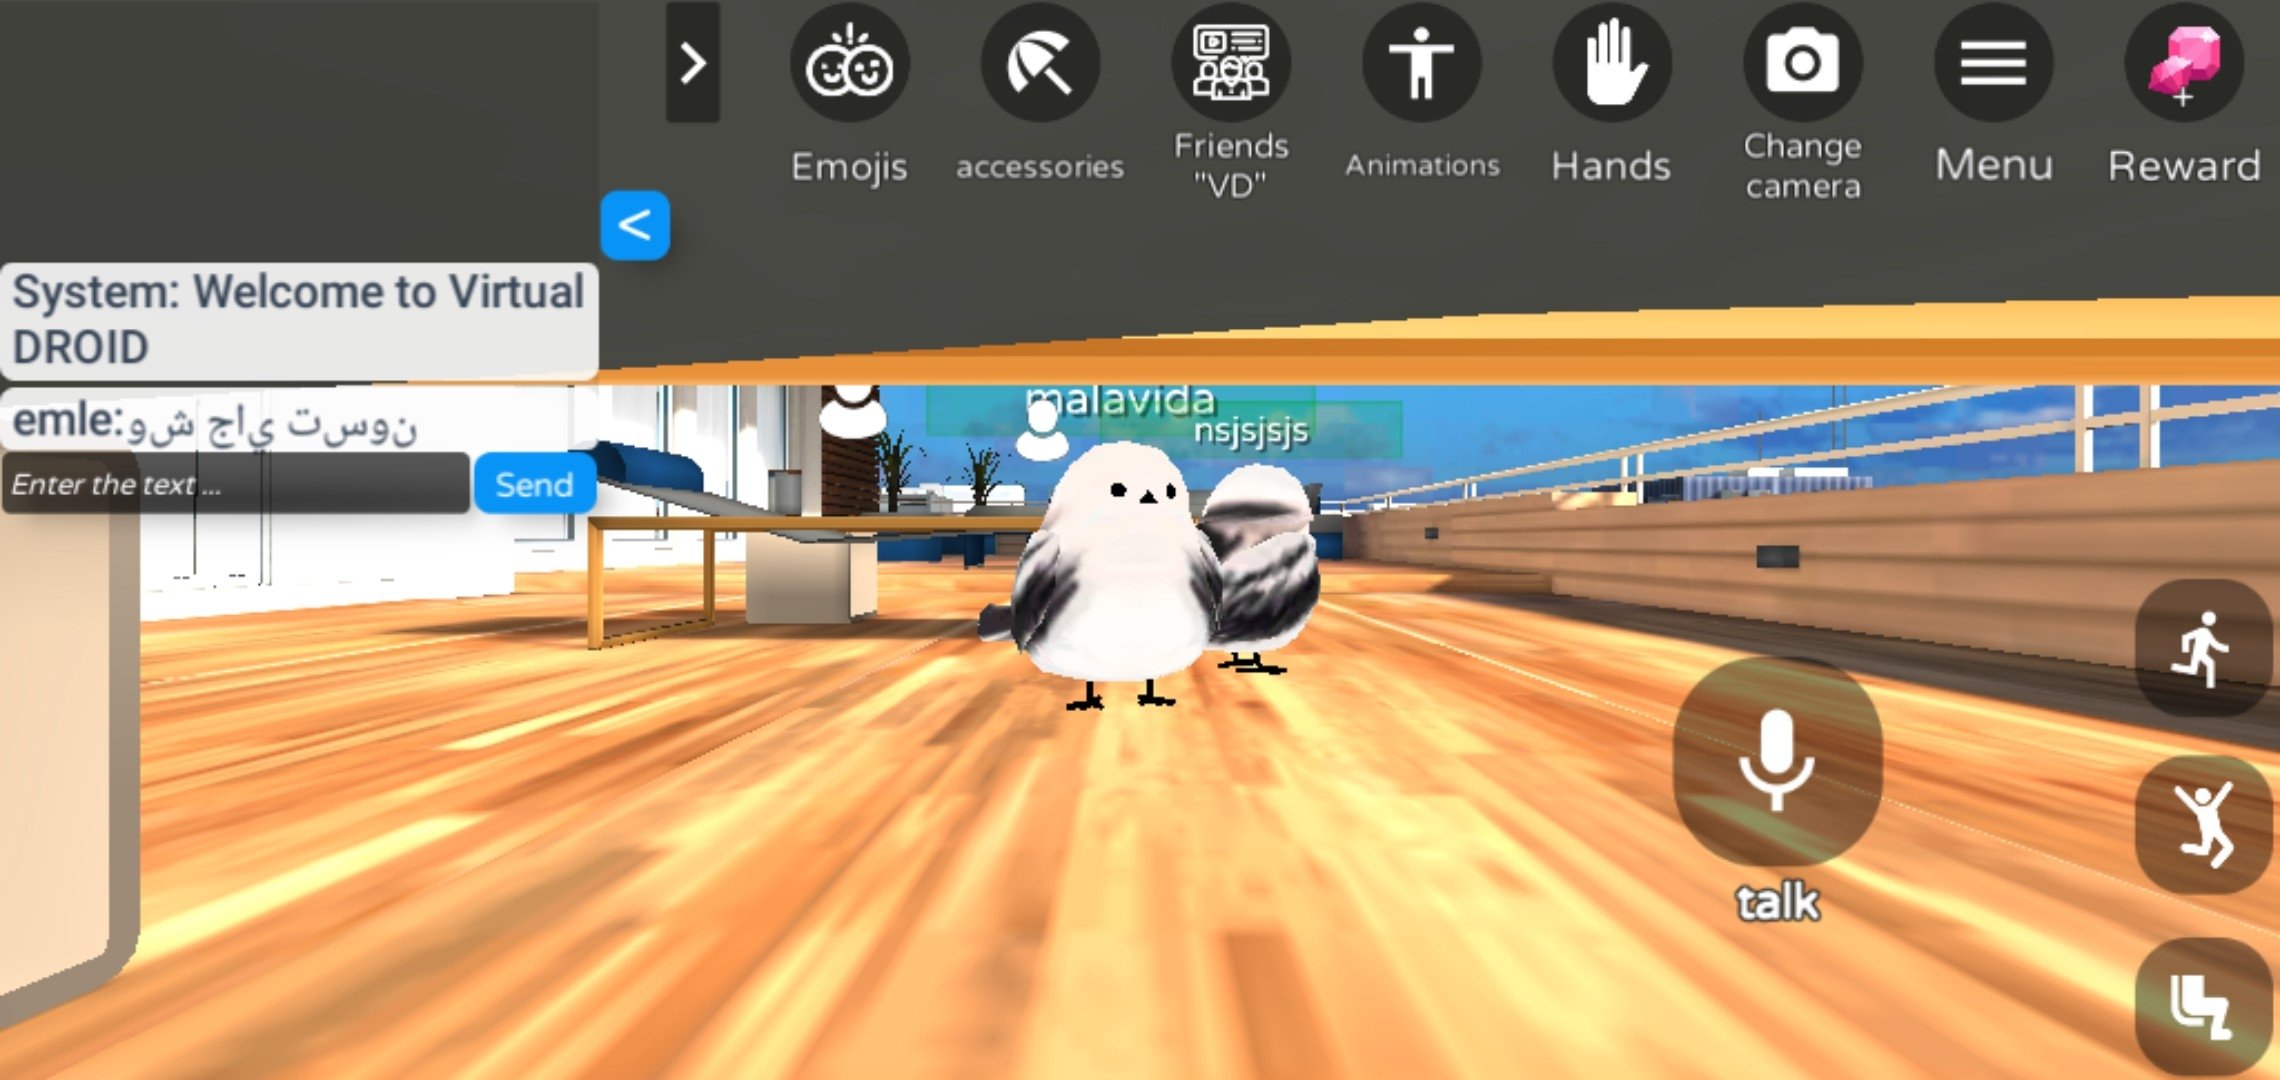 vrchat skins roblox avatars 10 apk download for android